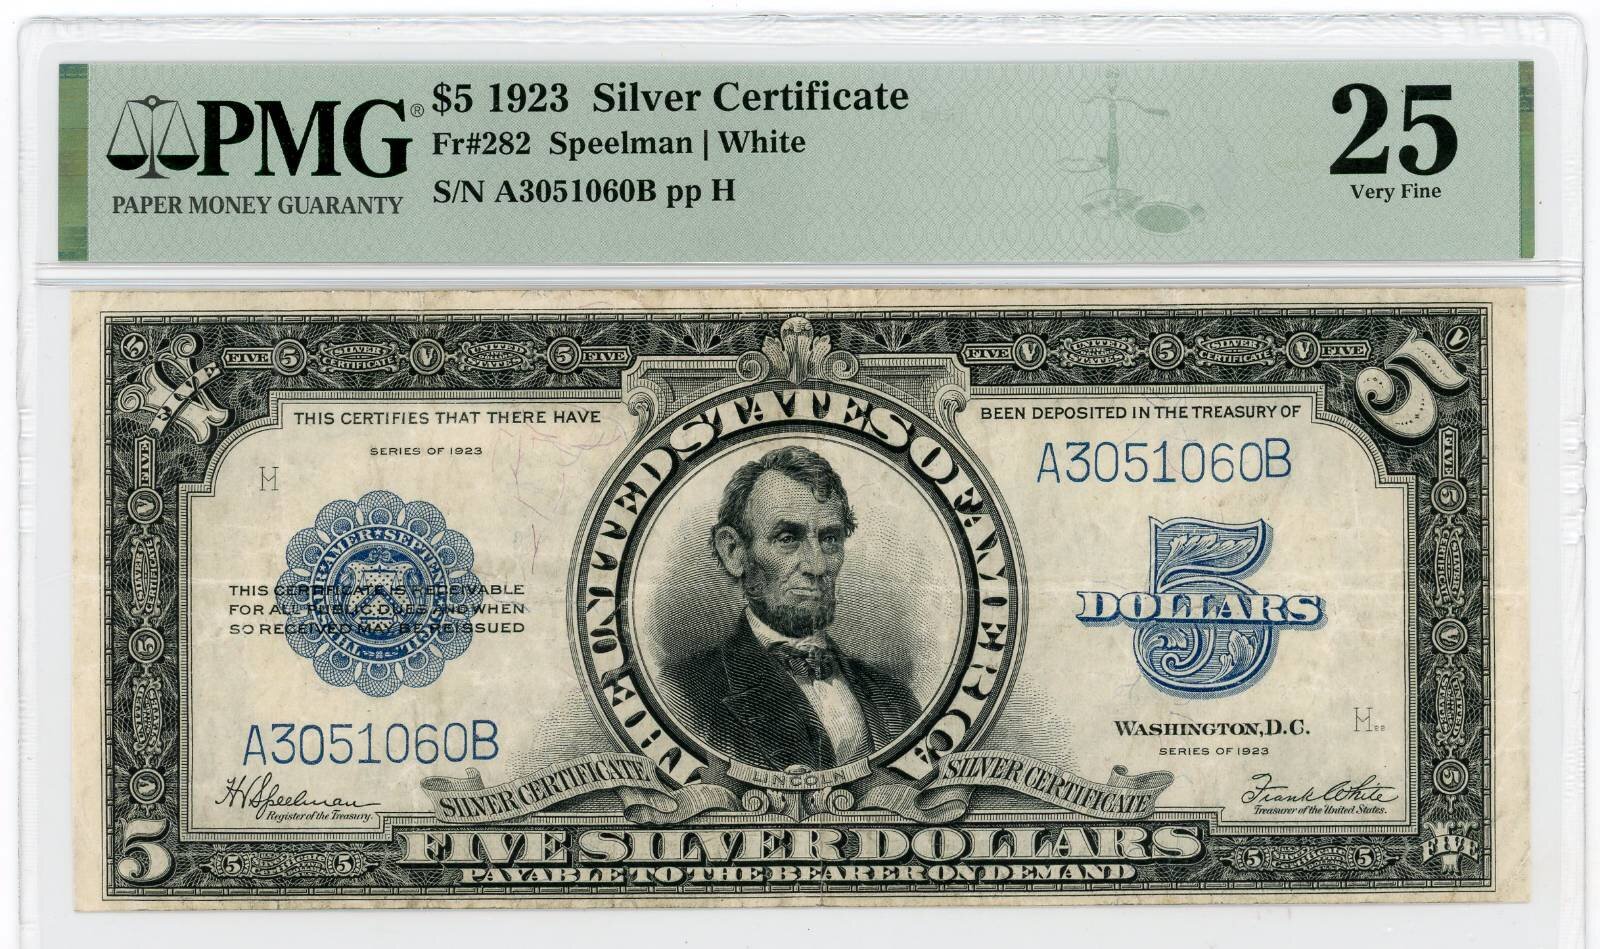 Featured item from the U.S. Graded Currency Sale!

US 282 1923 $5 Blue Speelman White Silver Cert PMG 25

Auction ends: TOMORROW - Monday, December 4th at 6:55pm EST

Visit the &quot;Current Sales&quot; link in our profile to view the catalogue and b